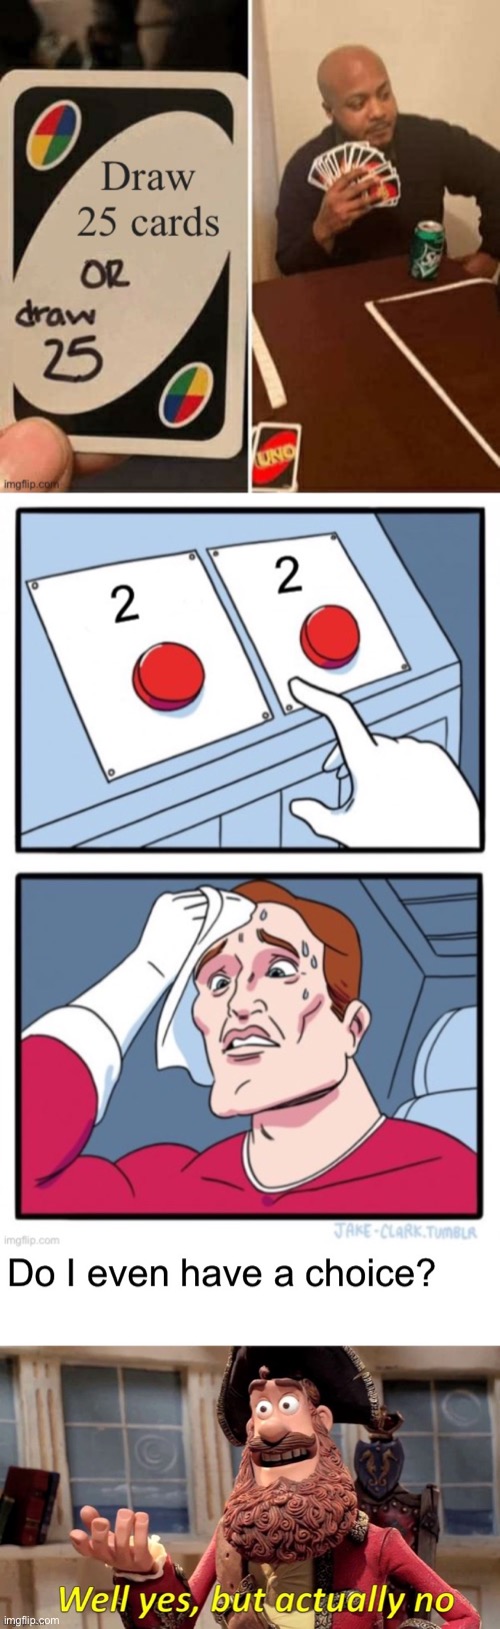 Then, do I odd have a choice? | image tagged in memes,uno draw 25 cards,two buttons,well yes but actually no,funny,hard choice to make | made w/ Imgflip meme maker